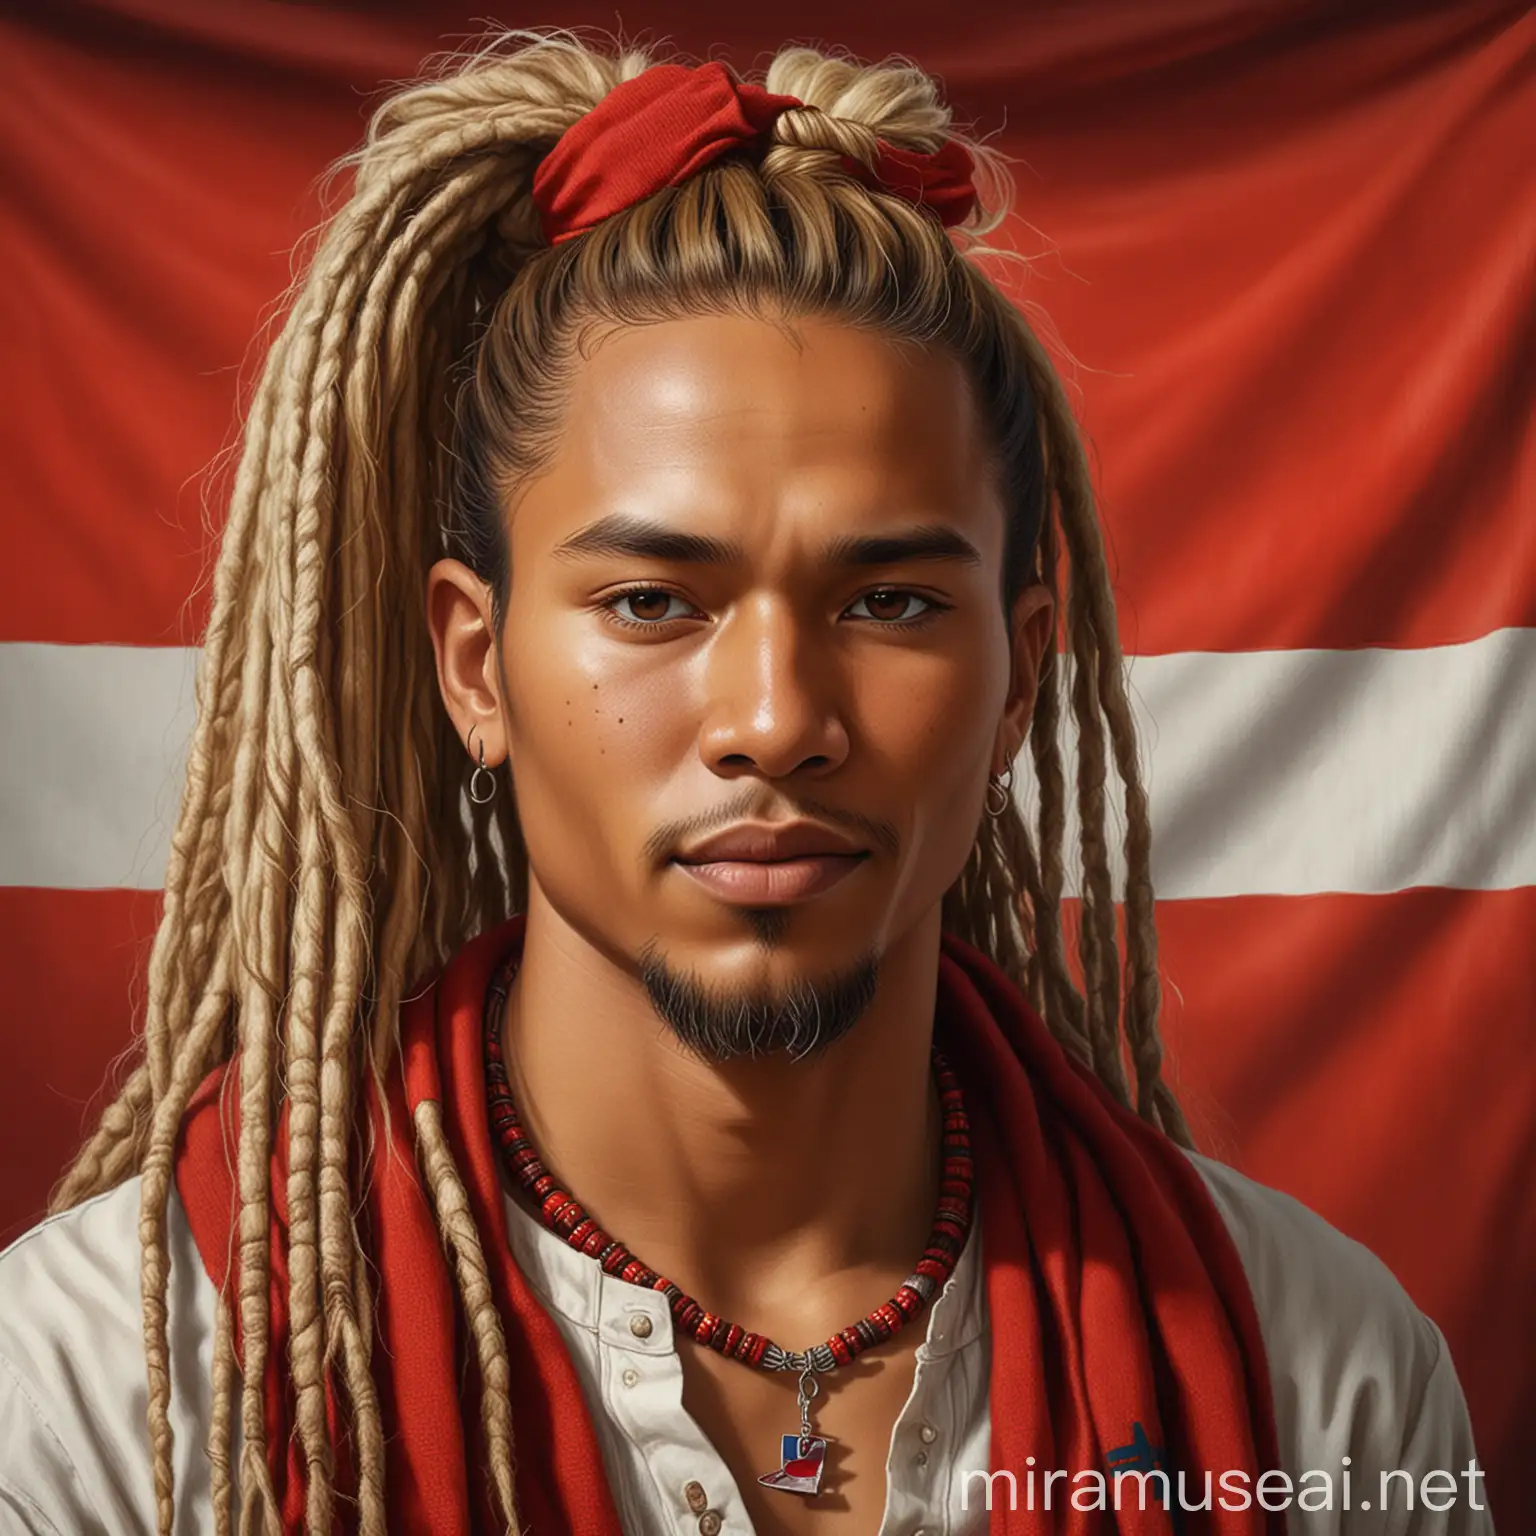 This beautiful oil painting shows an Indonesian man with long, blonde dreadlocks tied in a neat bun.  clean and handsome face, brown skin color.  She wore red knitwear and a beautiful necklace made from natural materials.  The background of the Indonesian flag is red and white.  beautiful and realistic masterpiece.